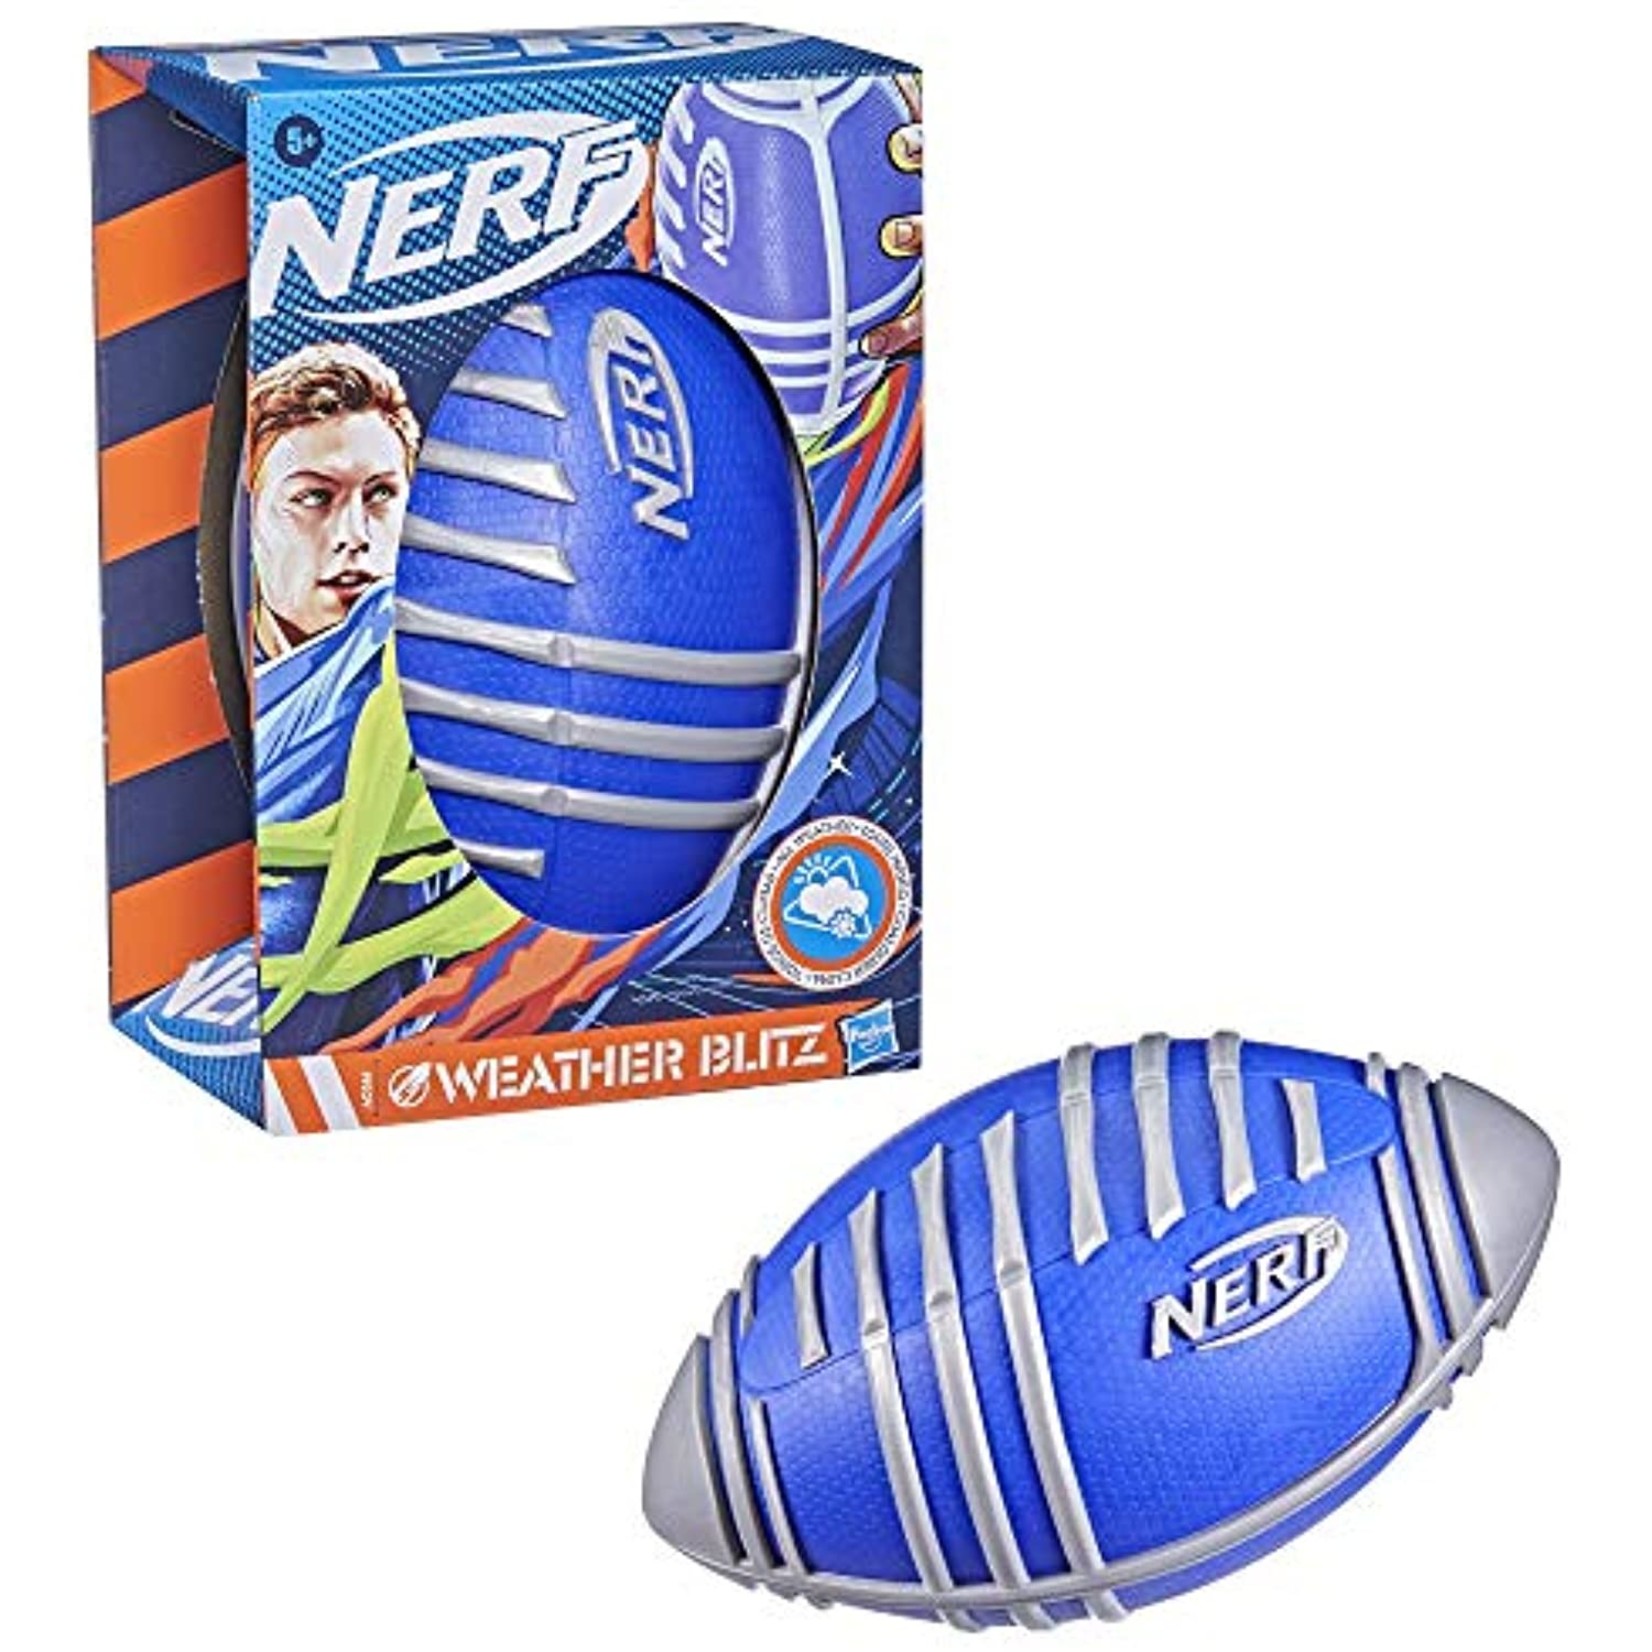 NERF Weather Blitz Foam Football for All-Weather Play - Silver